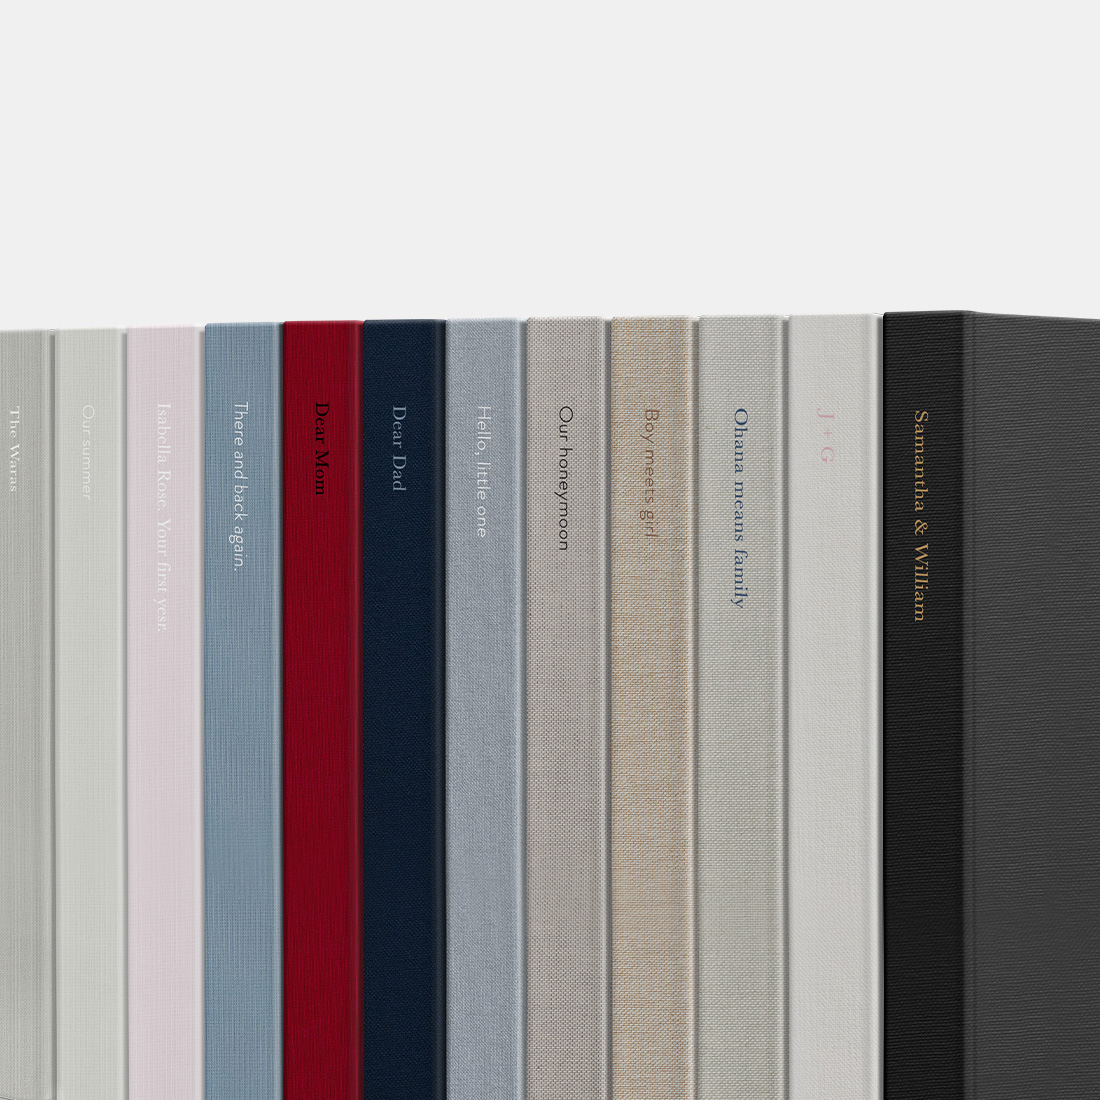 Stack of Premium Photo Albums with different cover fabrics.